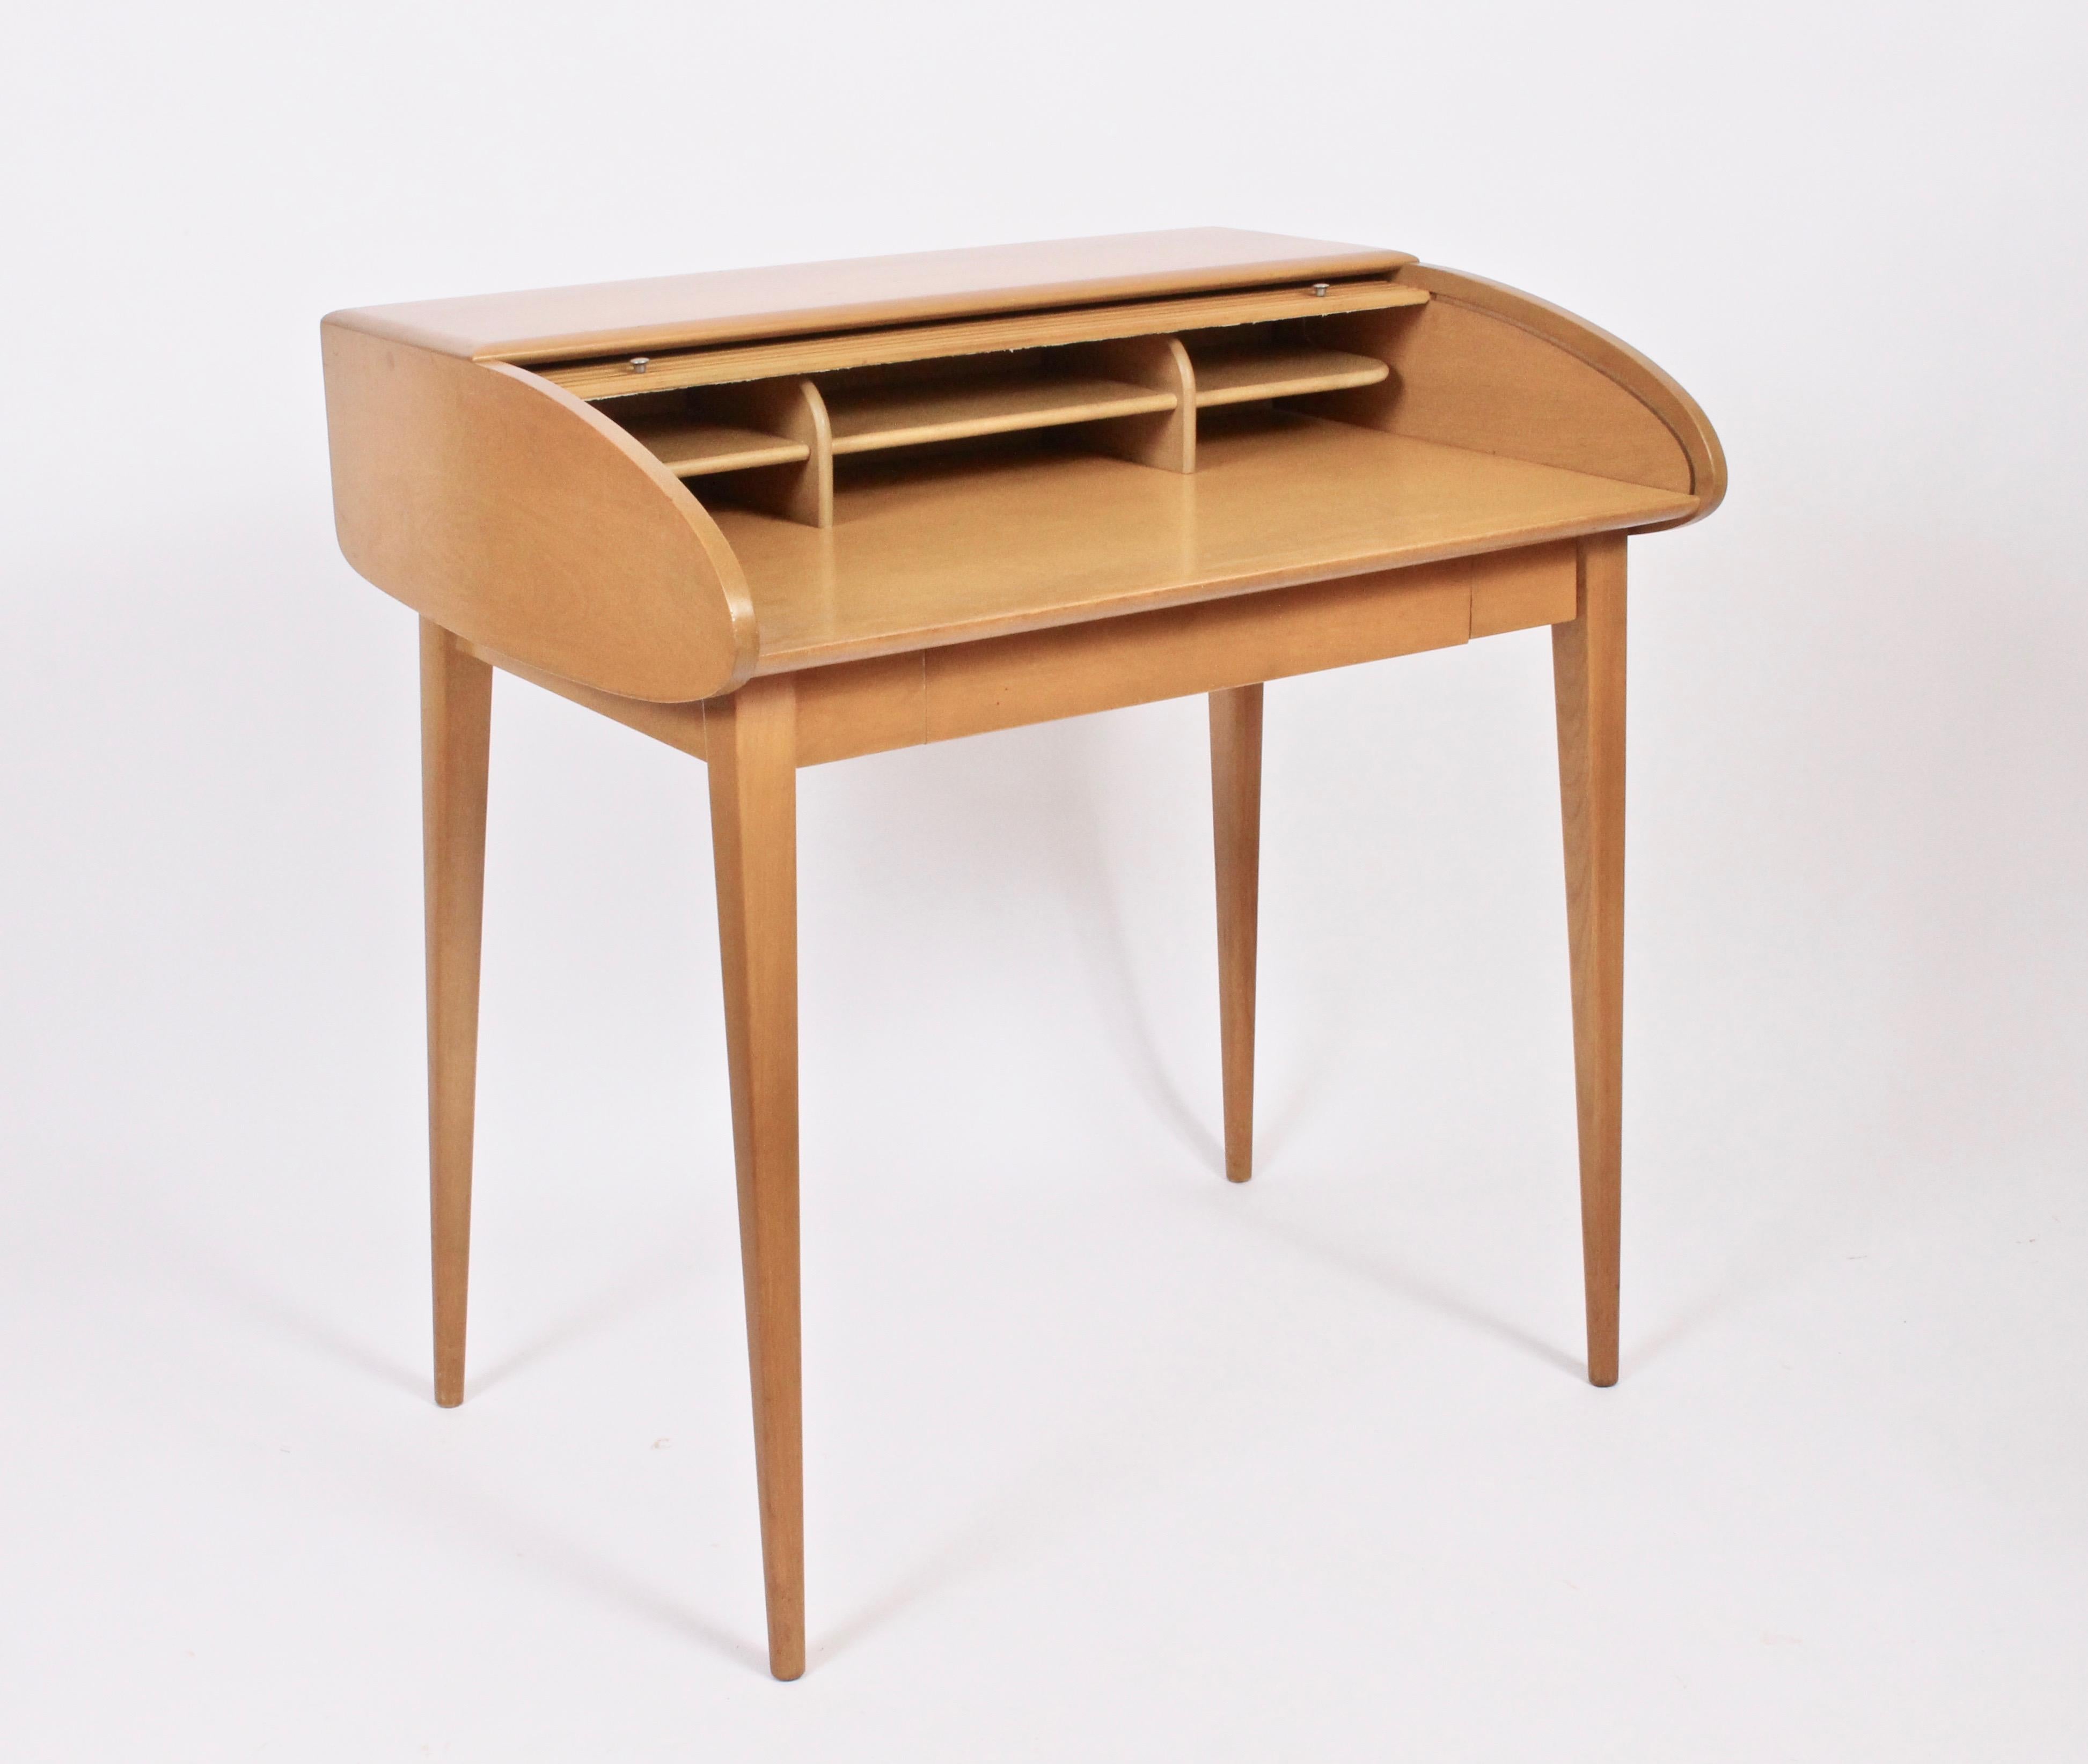 Classic American Mid Century Heywood-Wakefield Petite Birch Roll Top Desk. With finished back.  Featuring six interior compartments.  Legs attach and detach with wingnuts. Amber finish. Rarity. Sleek. Storage. Small footprint. Eagle burn stamp